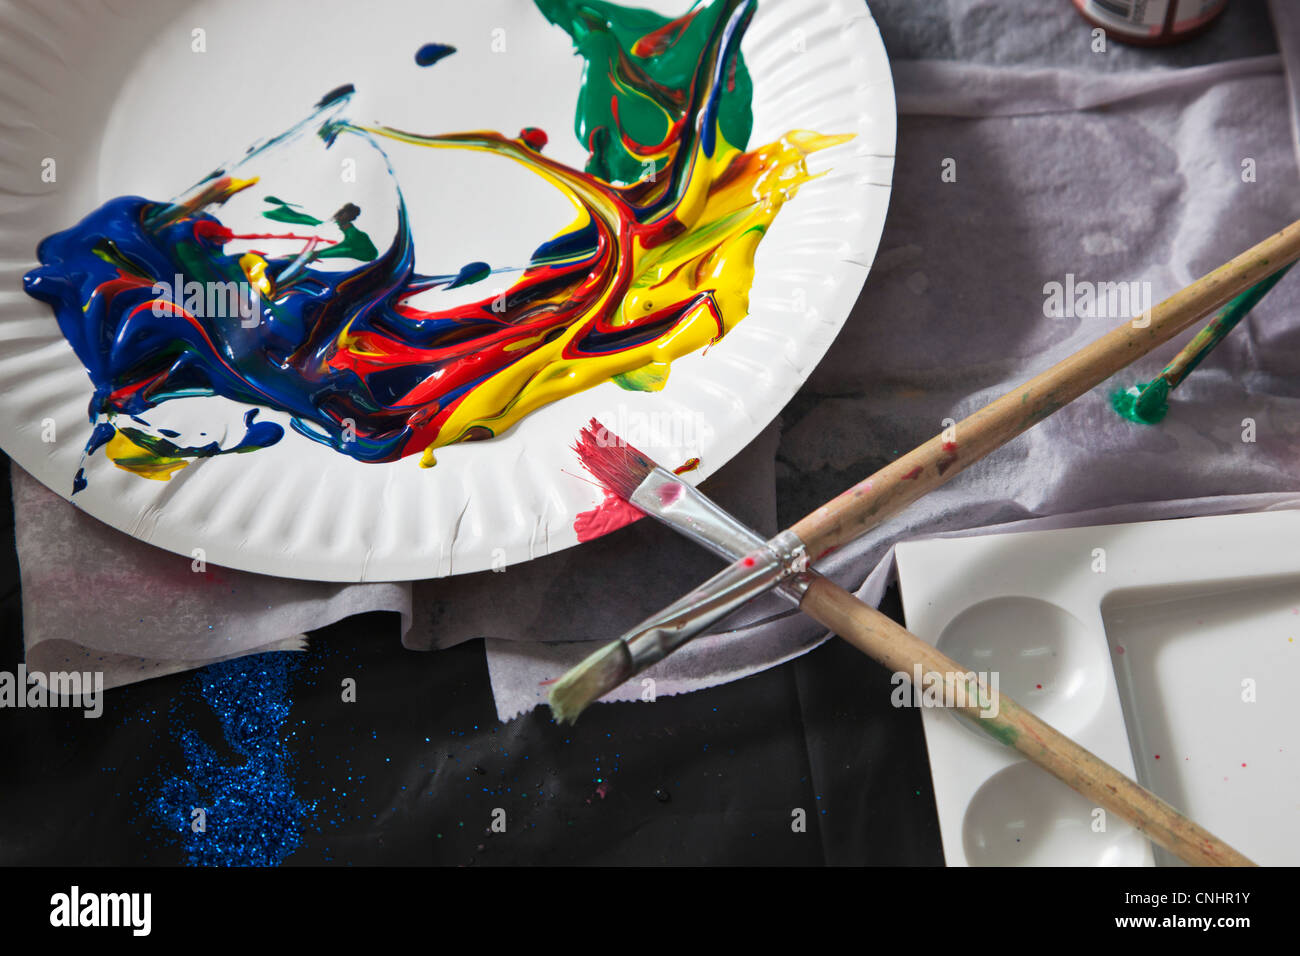 Heaps of acrylic paint on a paper plate and paintbrushes Stock Photo